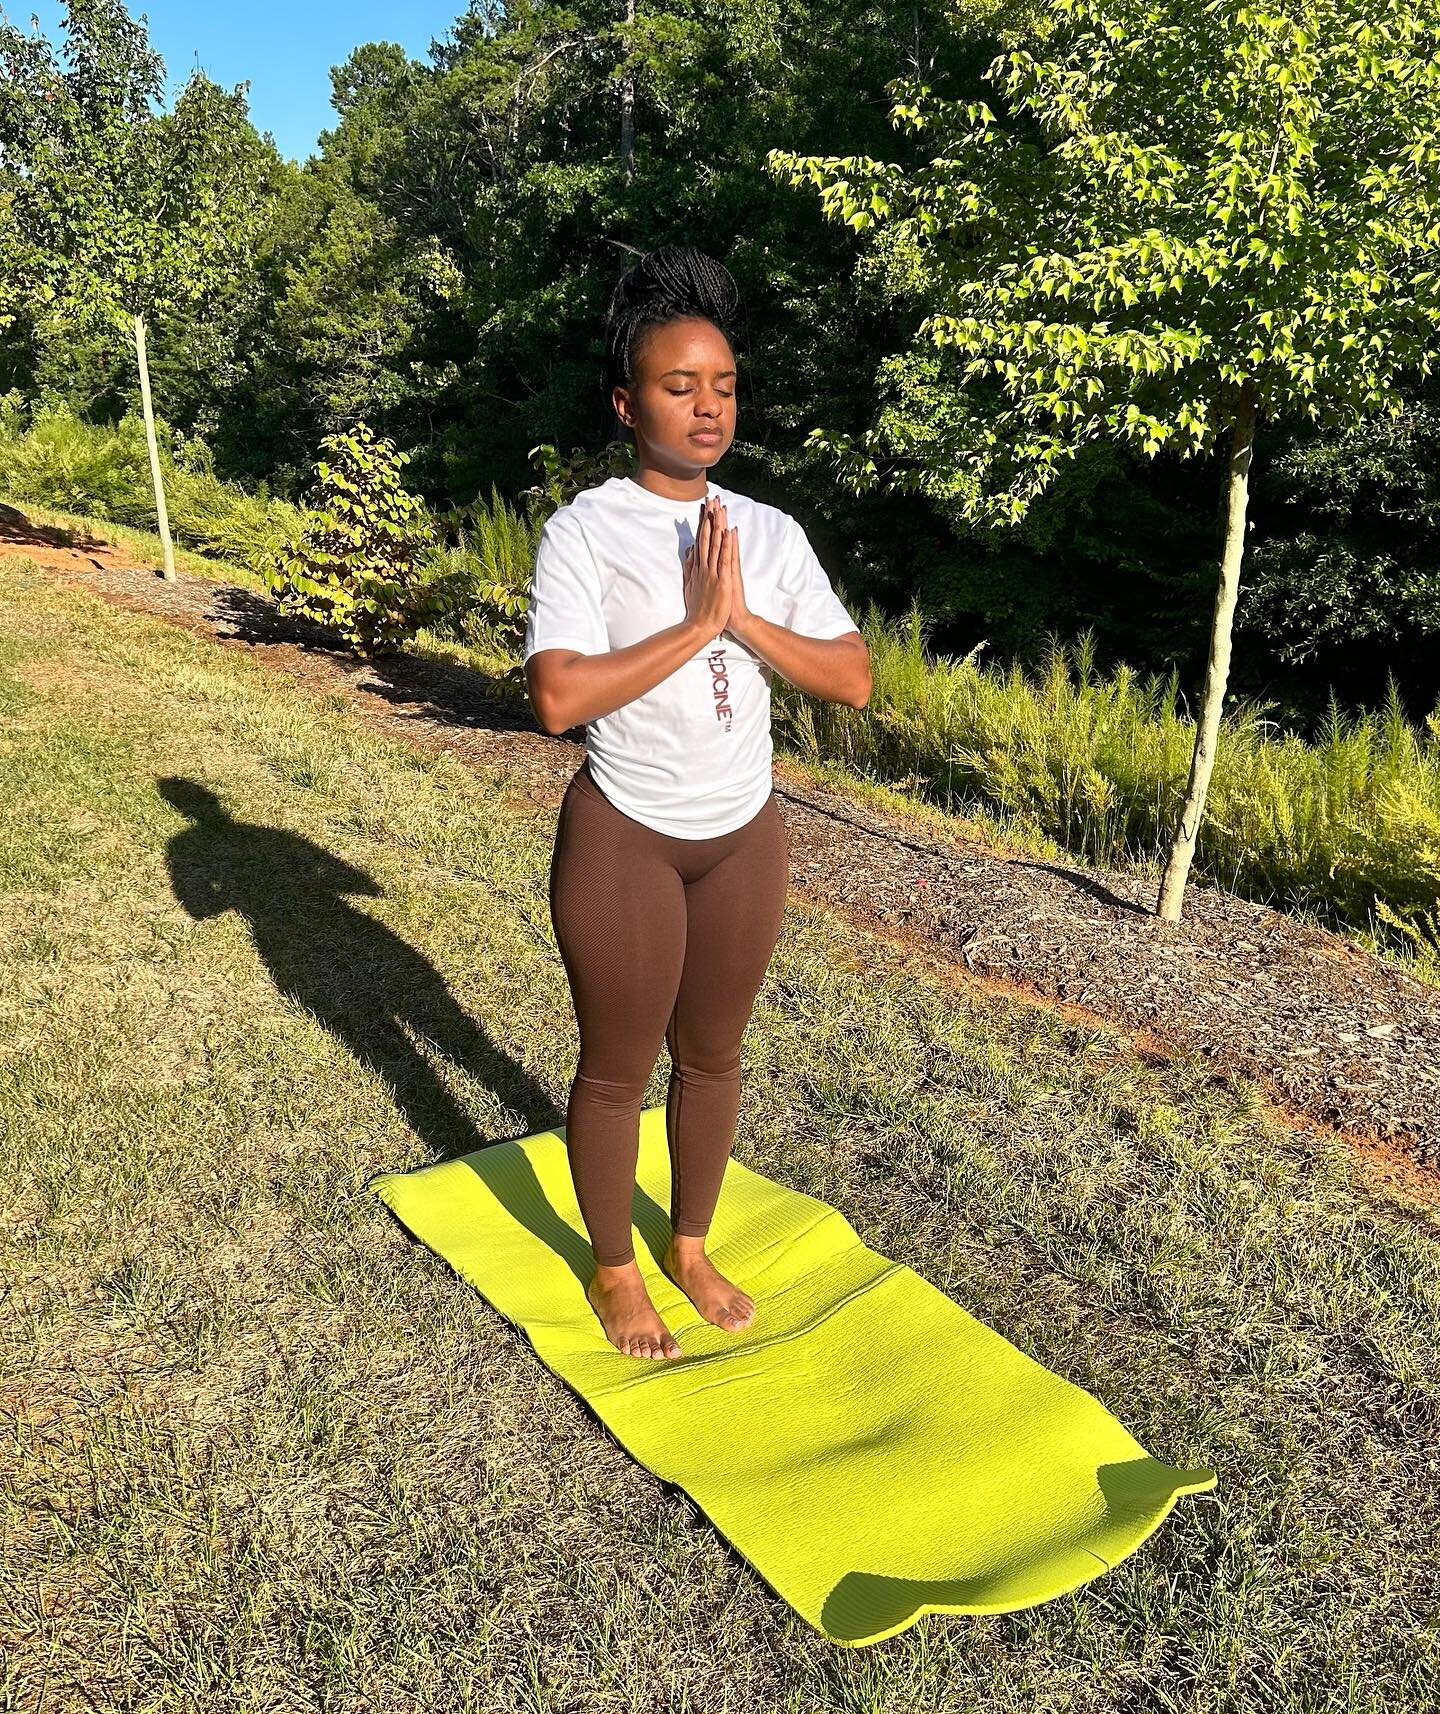 September is National Yoga Awareness Month! Celebrate by sporting some Color Of Medicine gear. Your contributions will enable us to meet our goal of promoting diversity and inclusion in STEM!
 
Fun Facts About Yoga:
- Yoga has origins traced back to 